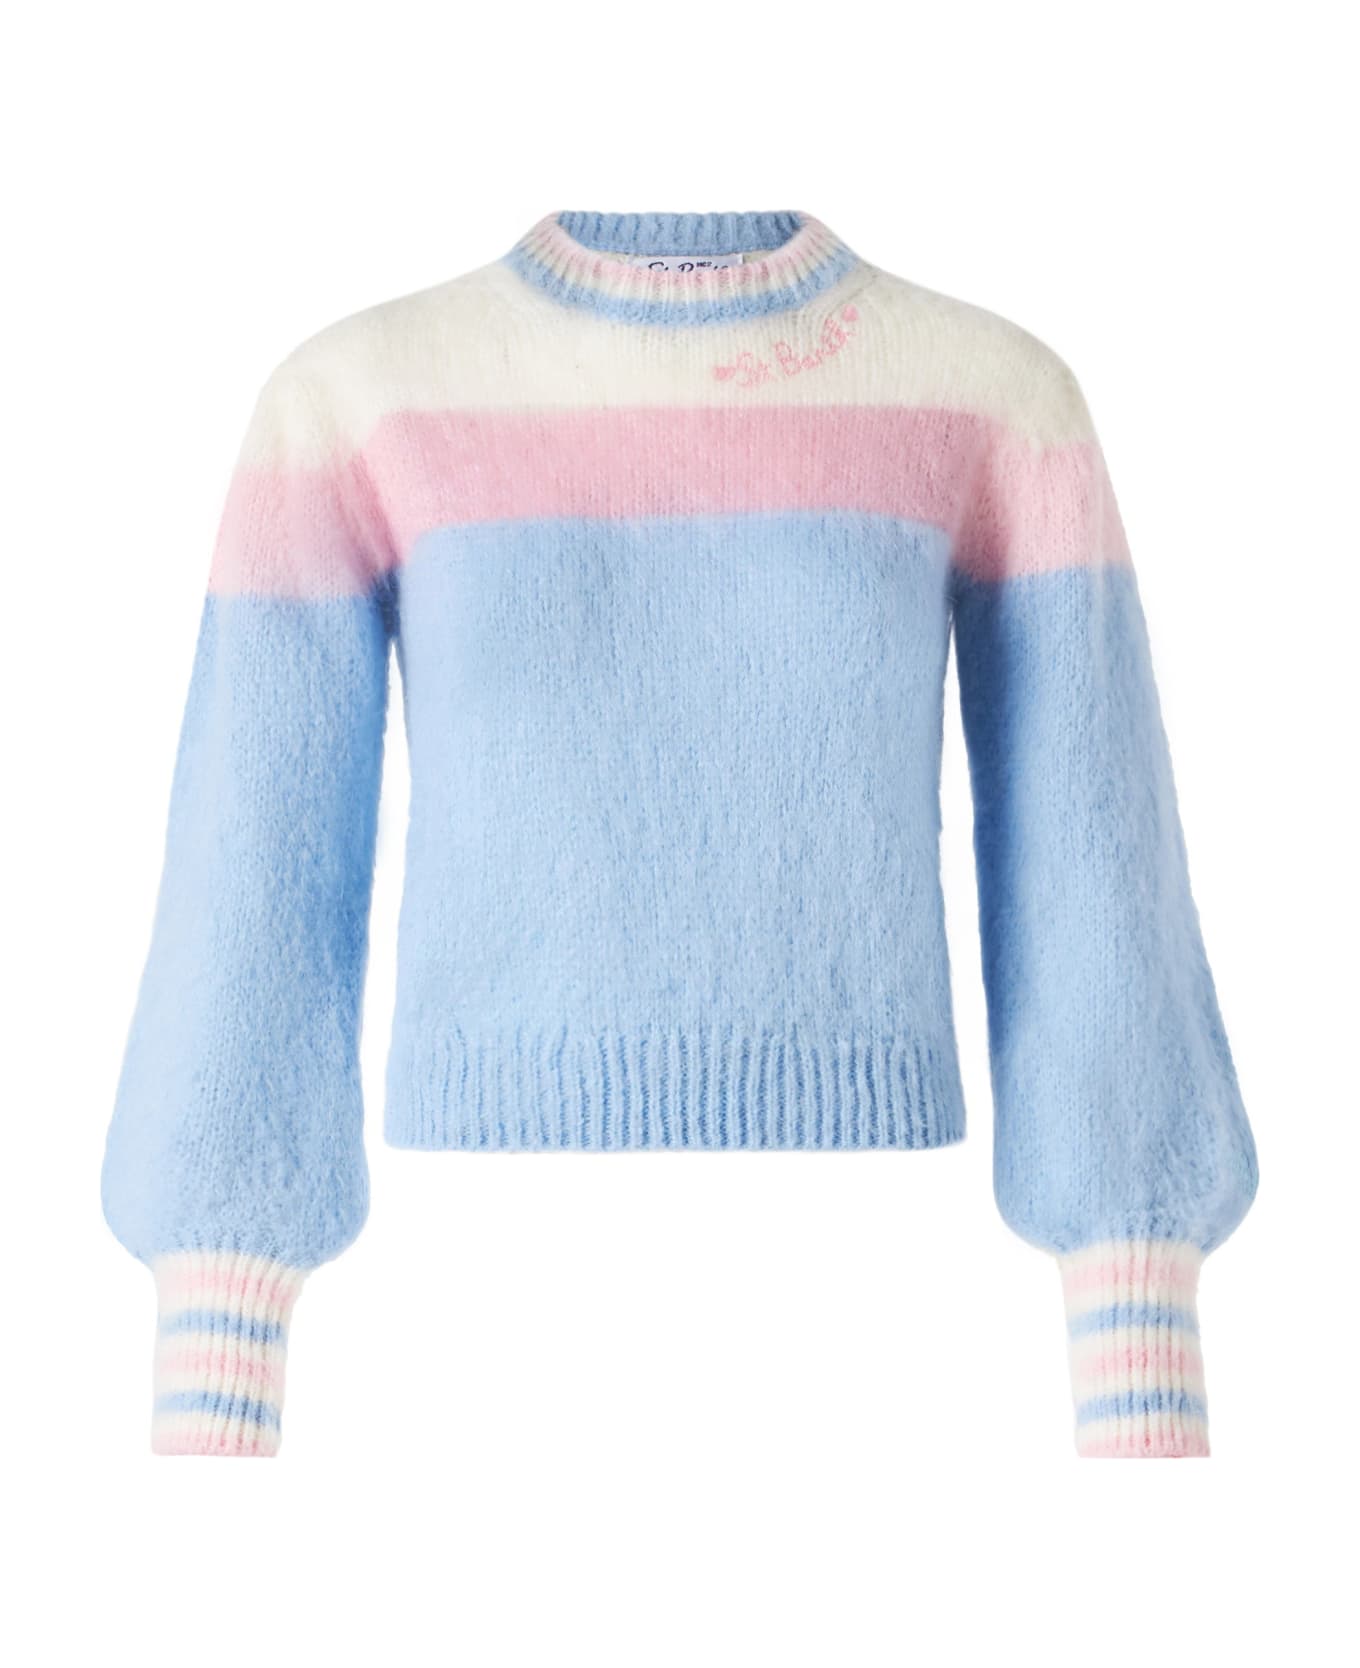 MC2 Saint Barth Brushed Knit Sweater With Puff Sleeves And St. Barth Embroidery - PINK ニットウェア